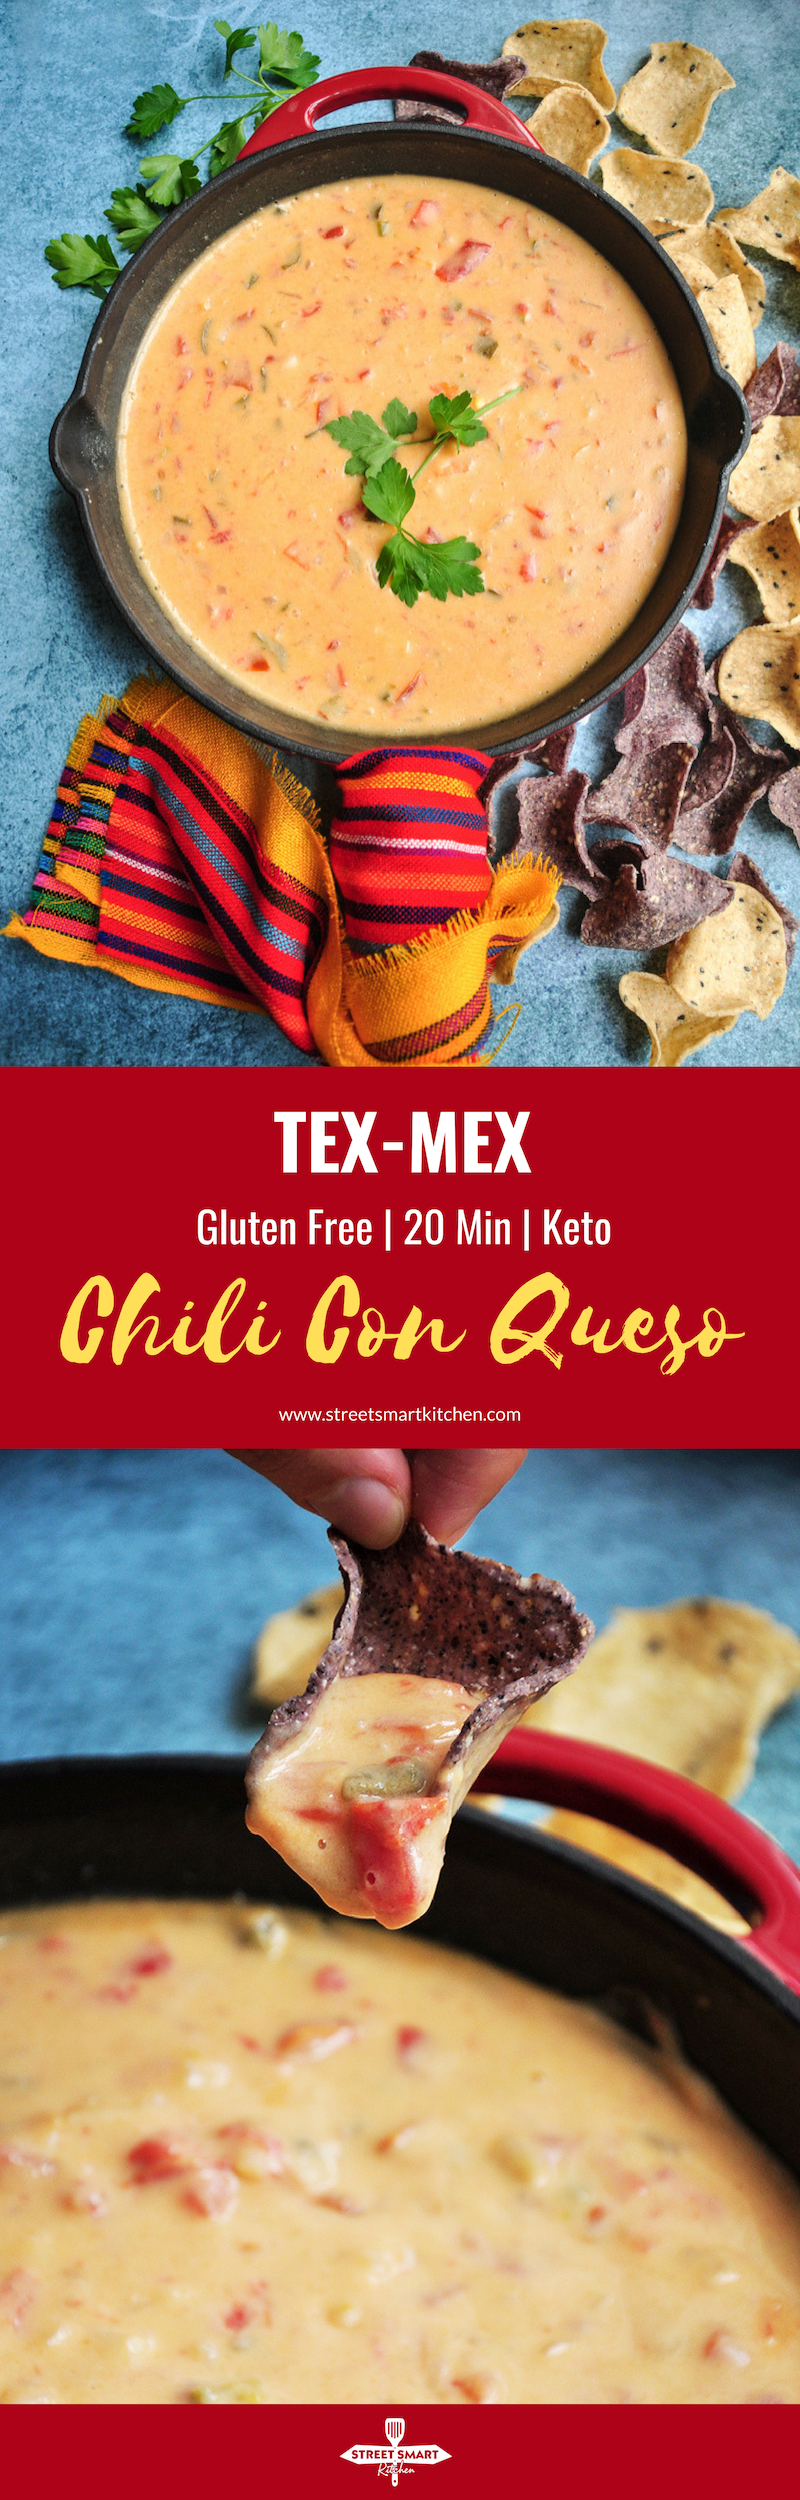 Ten ingredients and 20 minutes are all you need for this velvety, rich, and dangerously addictive Tex-Mex Chili Con Queso recipe. It’s also gluten-free. 